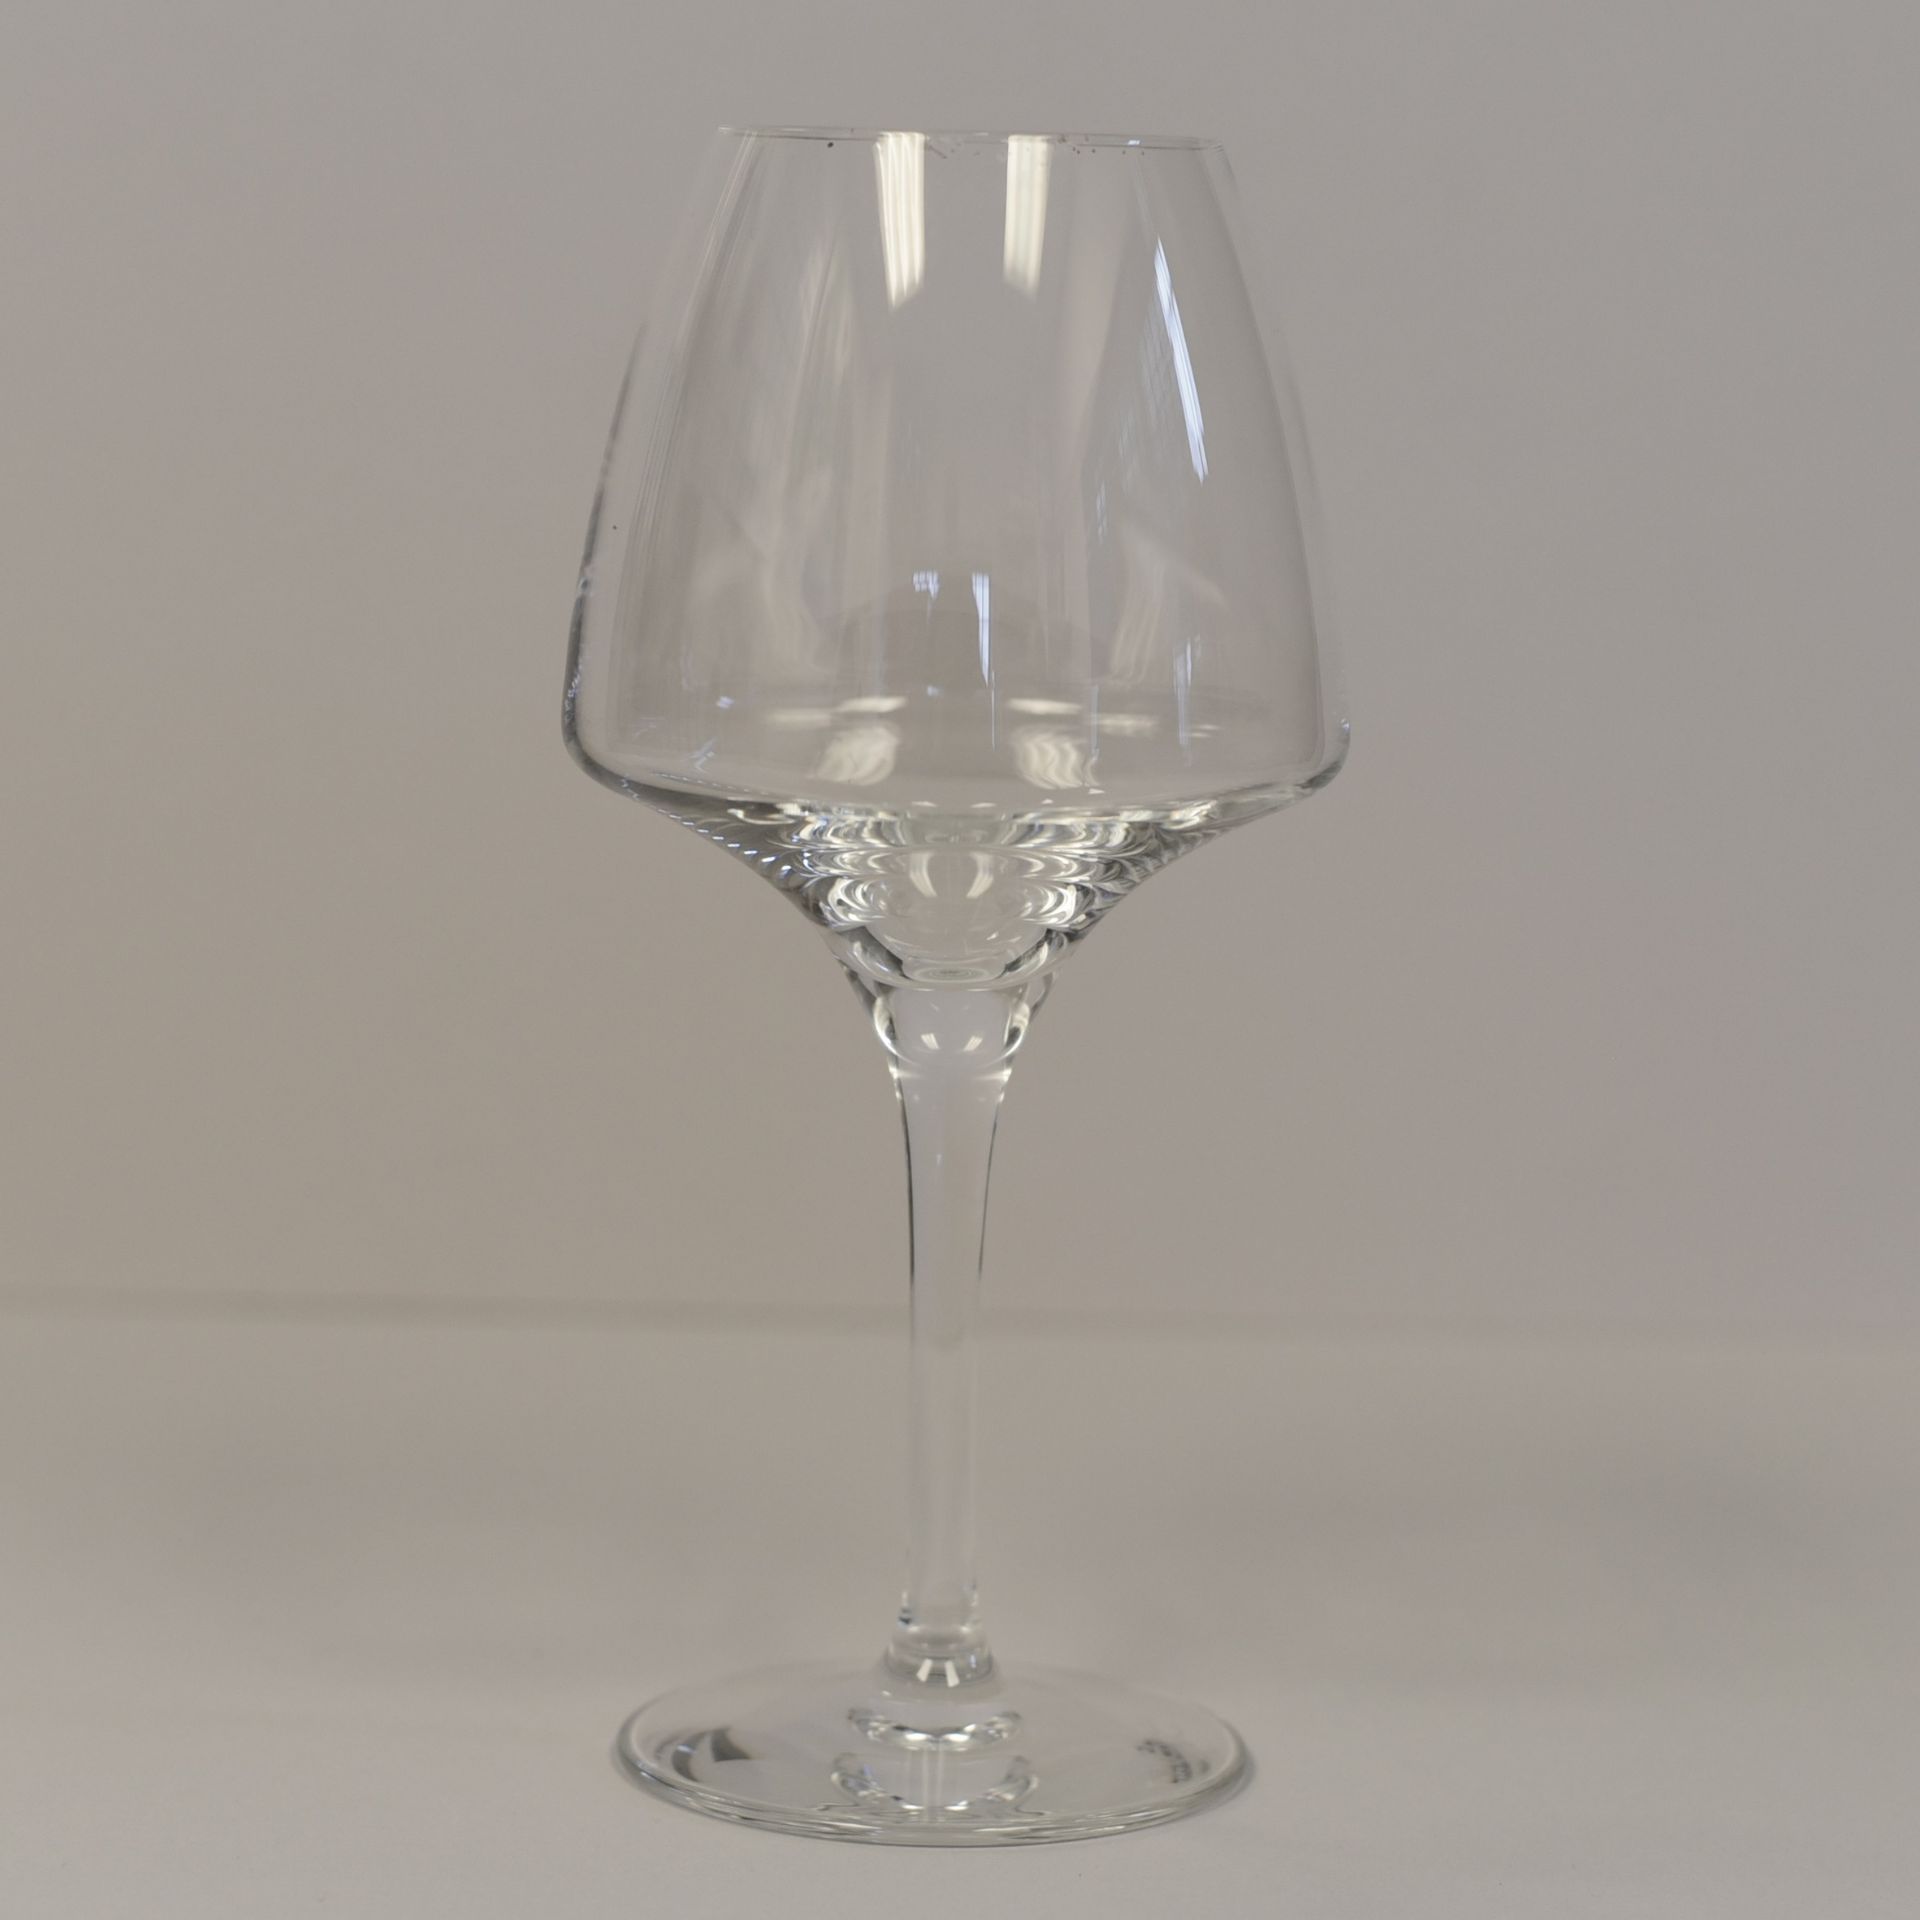 Approx. 21,253 items of glassware - Image 39 of 44